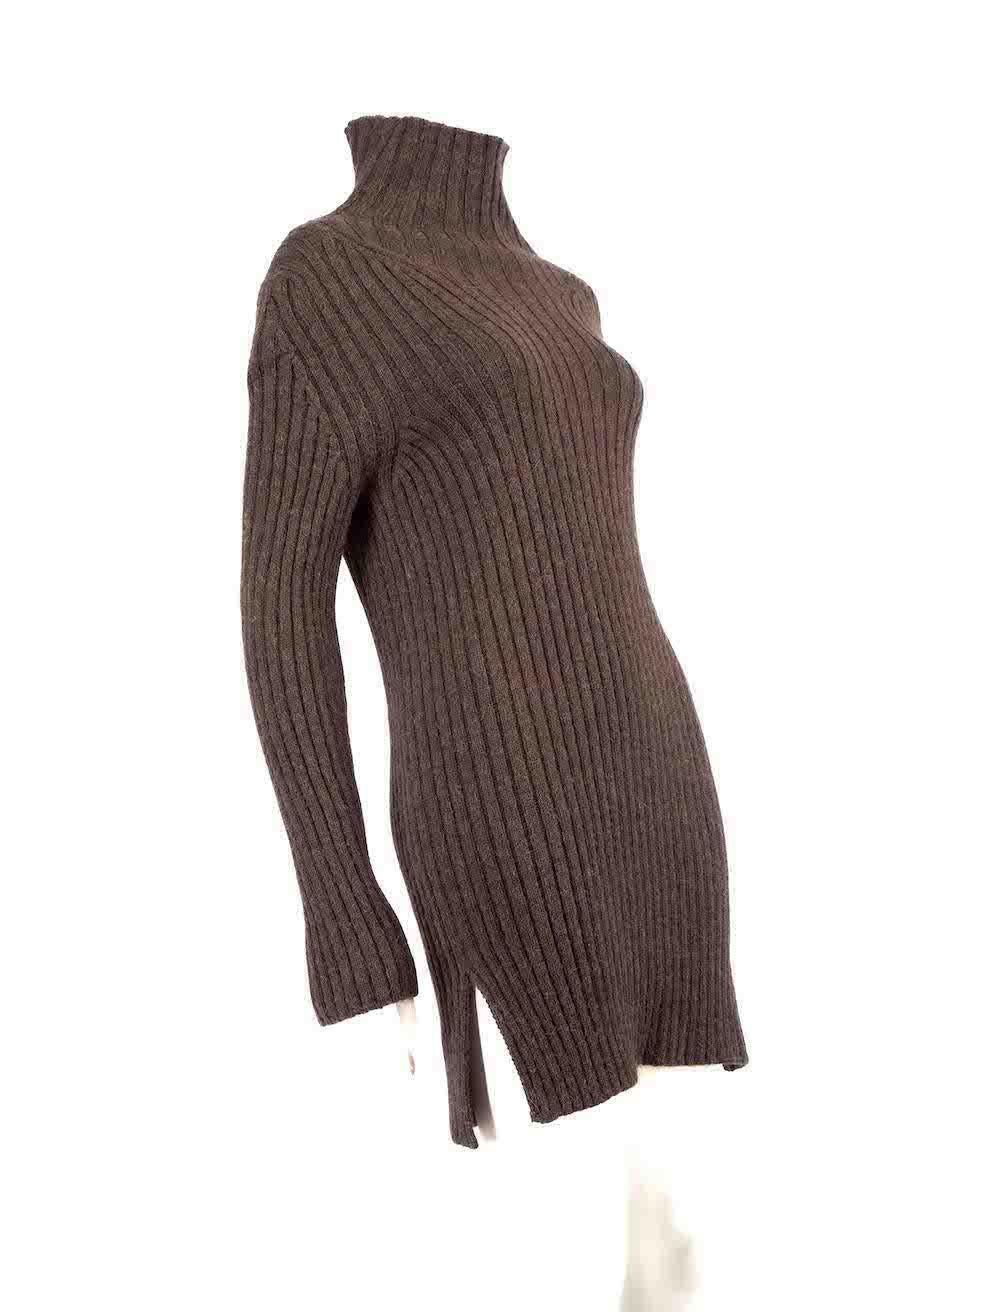 CONDITION is Very good. Hardly any visible wear to the dress is evident on this used Chloé designer resale item.
 
 
 
 Details
 
 
 Brown
 
 Wool
 
 Knit dress
 
 Turtleneck
 
 Long sleeves
 
 Mini
 
 
 
 
 
 Made in Italy
 
 
 
 Composition
 
 50%